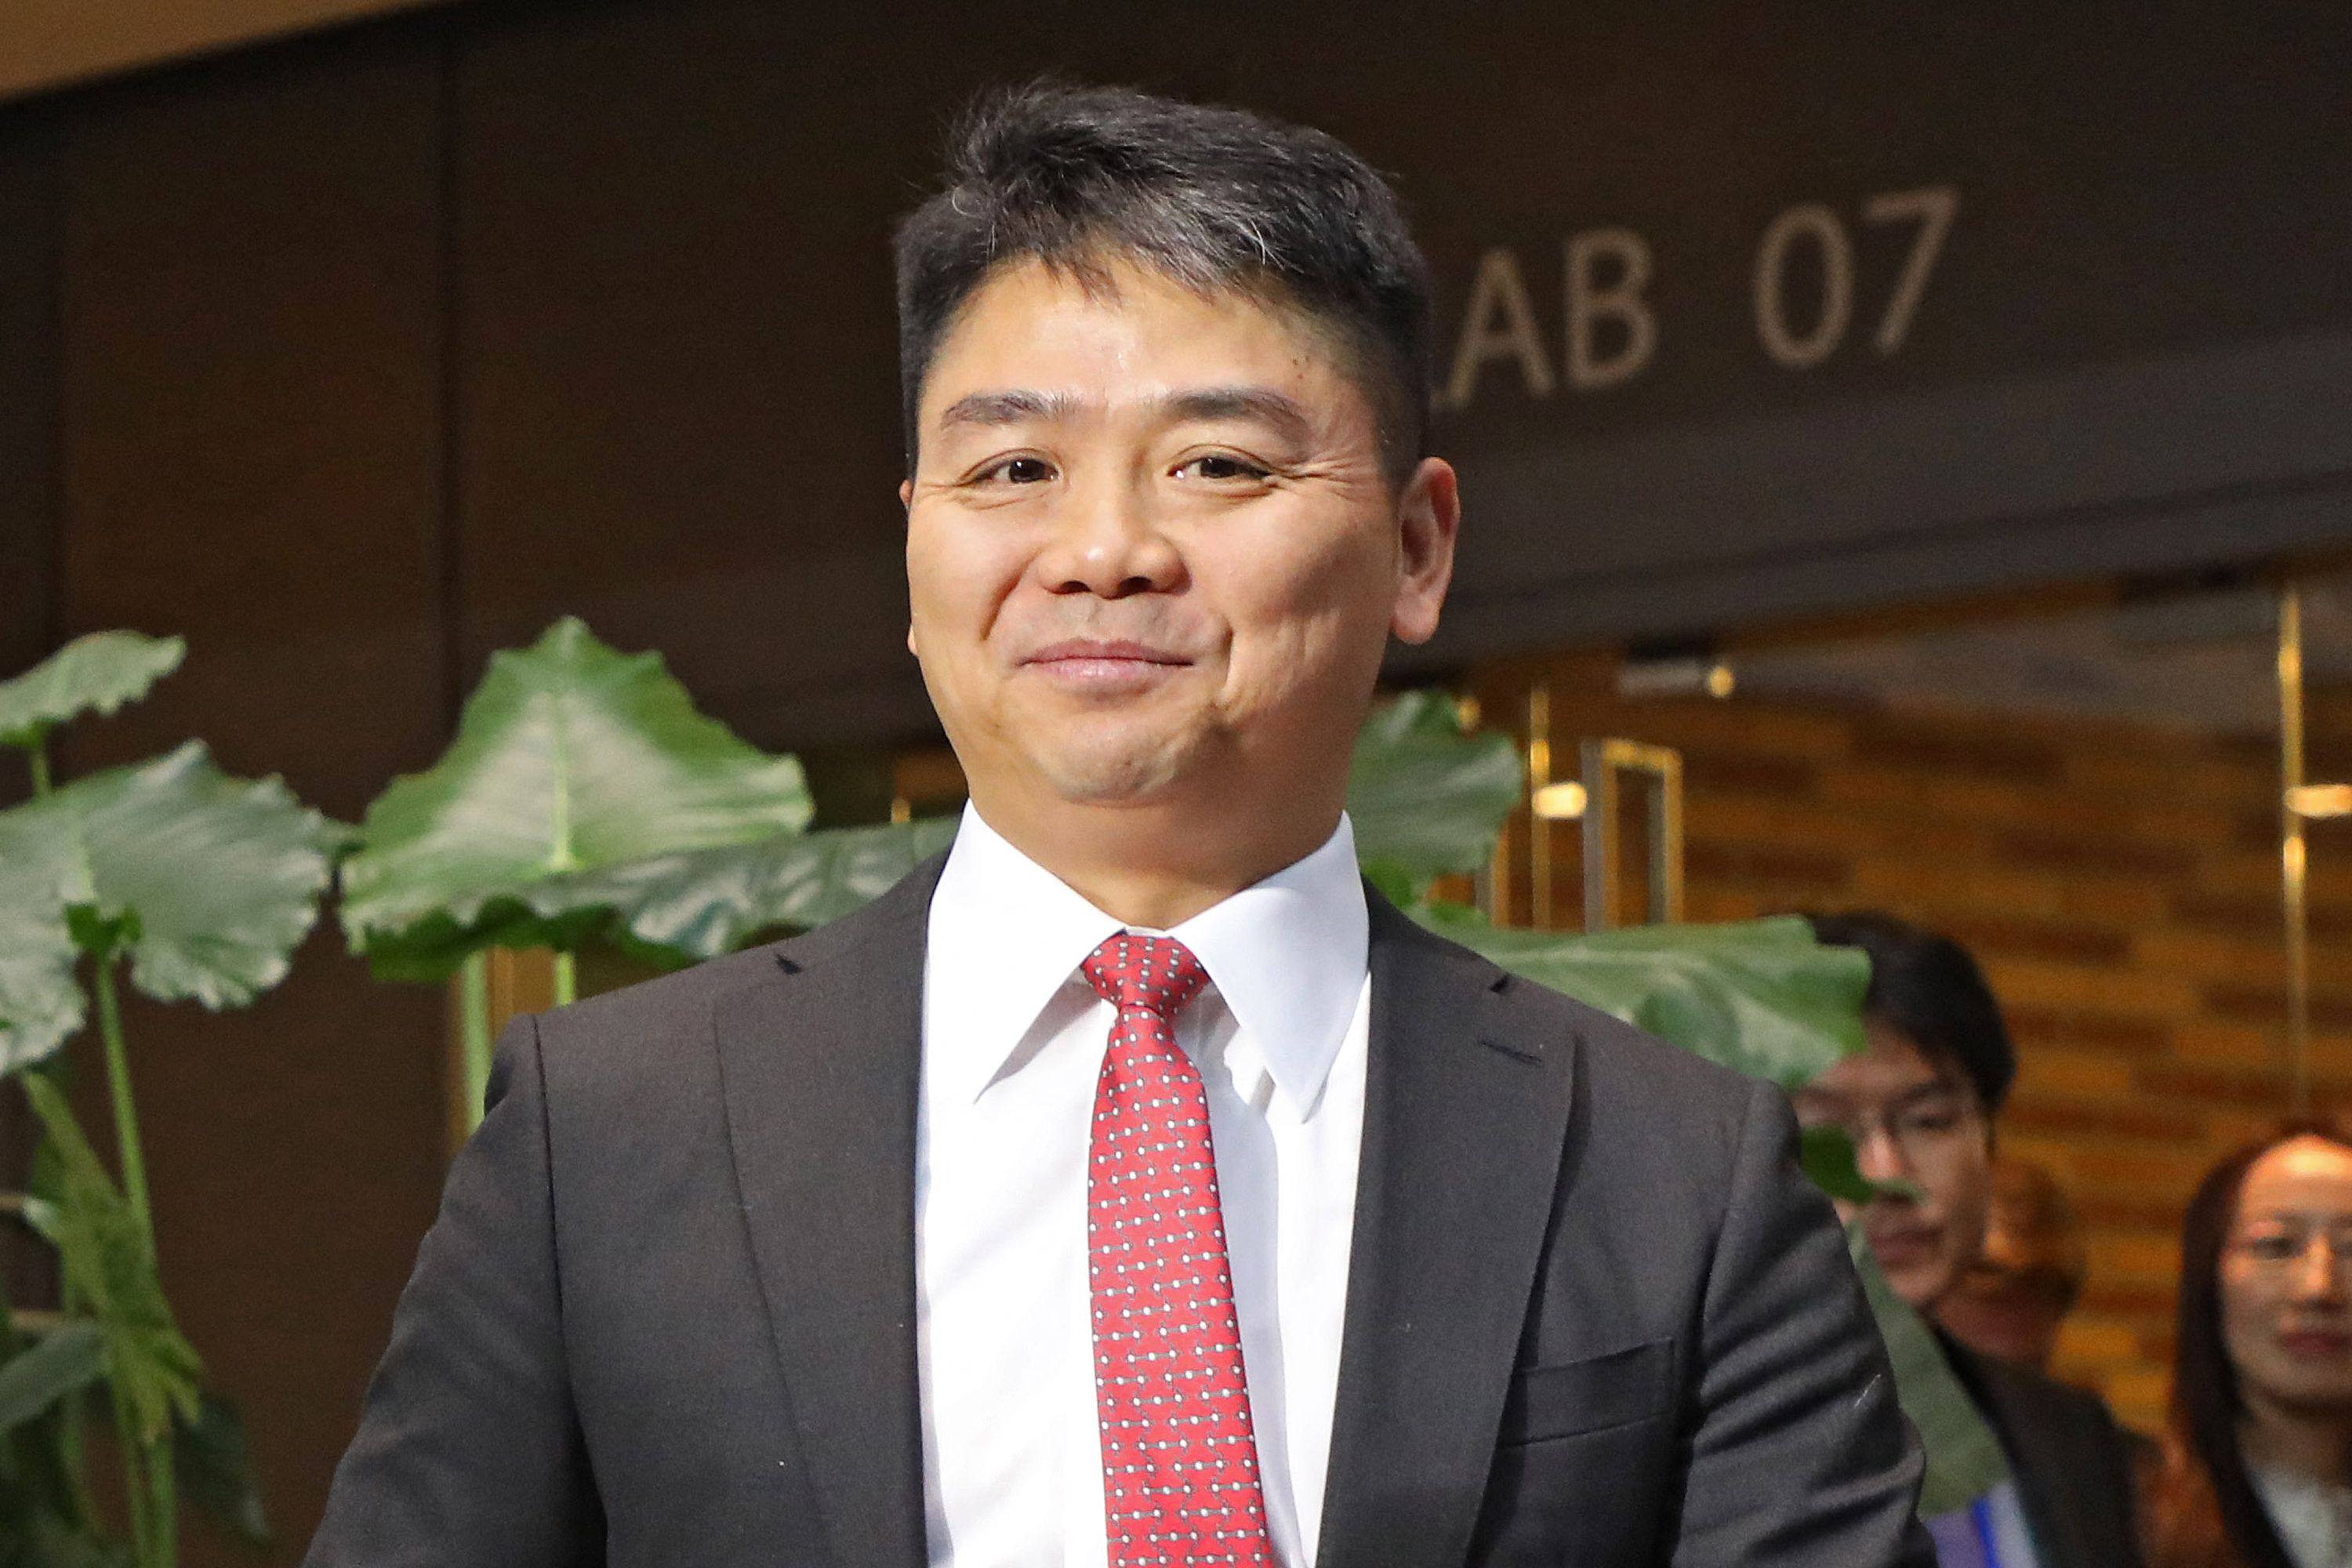 JD.com CEO Richard Liu Qiangdong pictured on January 9, 2018 after signing an agreement during a meeting between French leaders and business leaders in Beijing. Photo: AFP